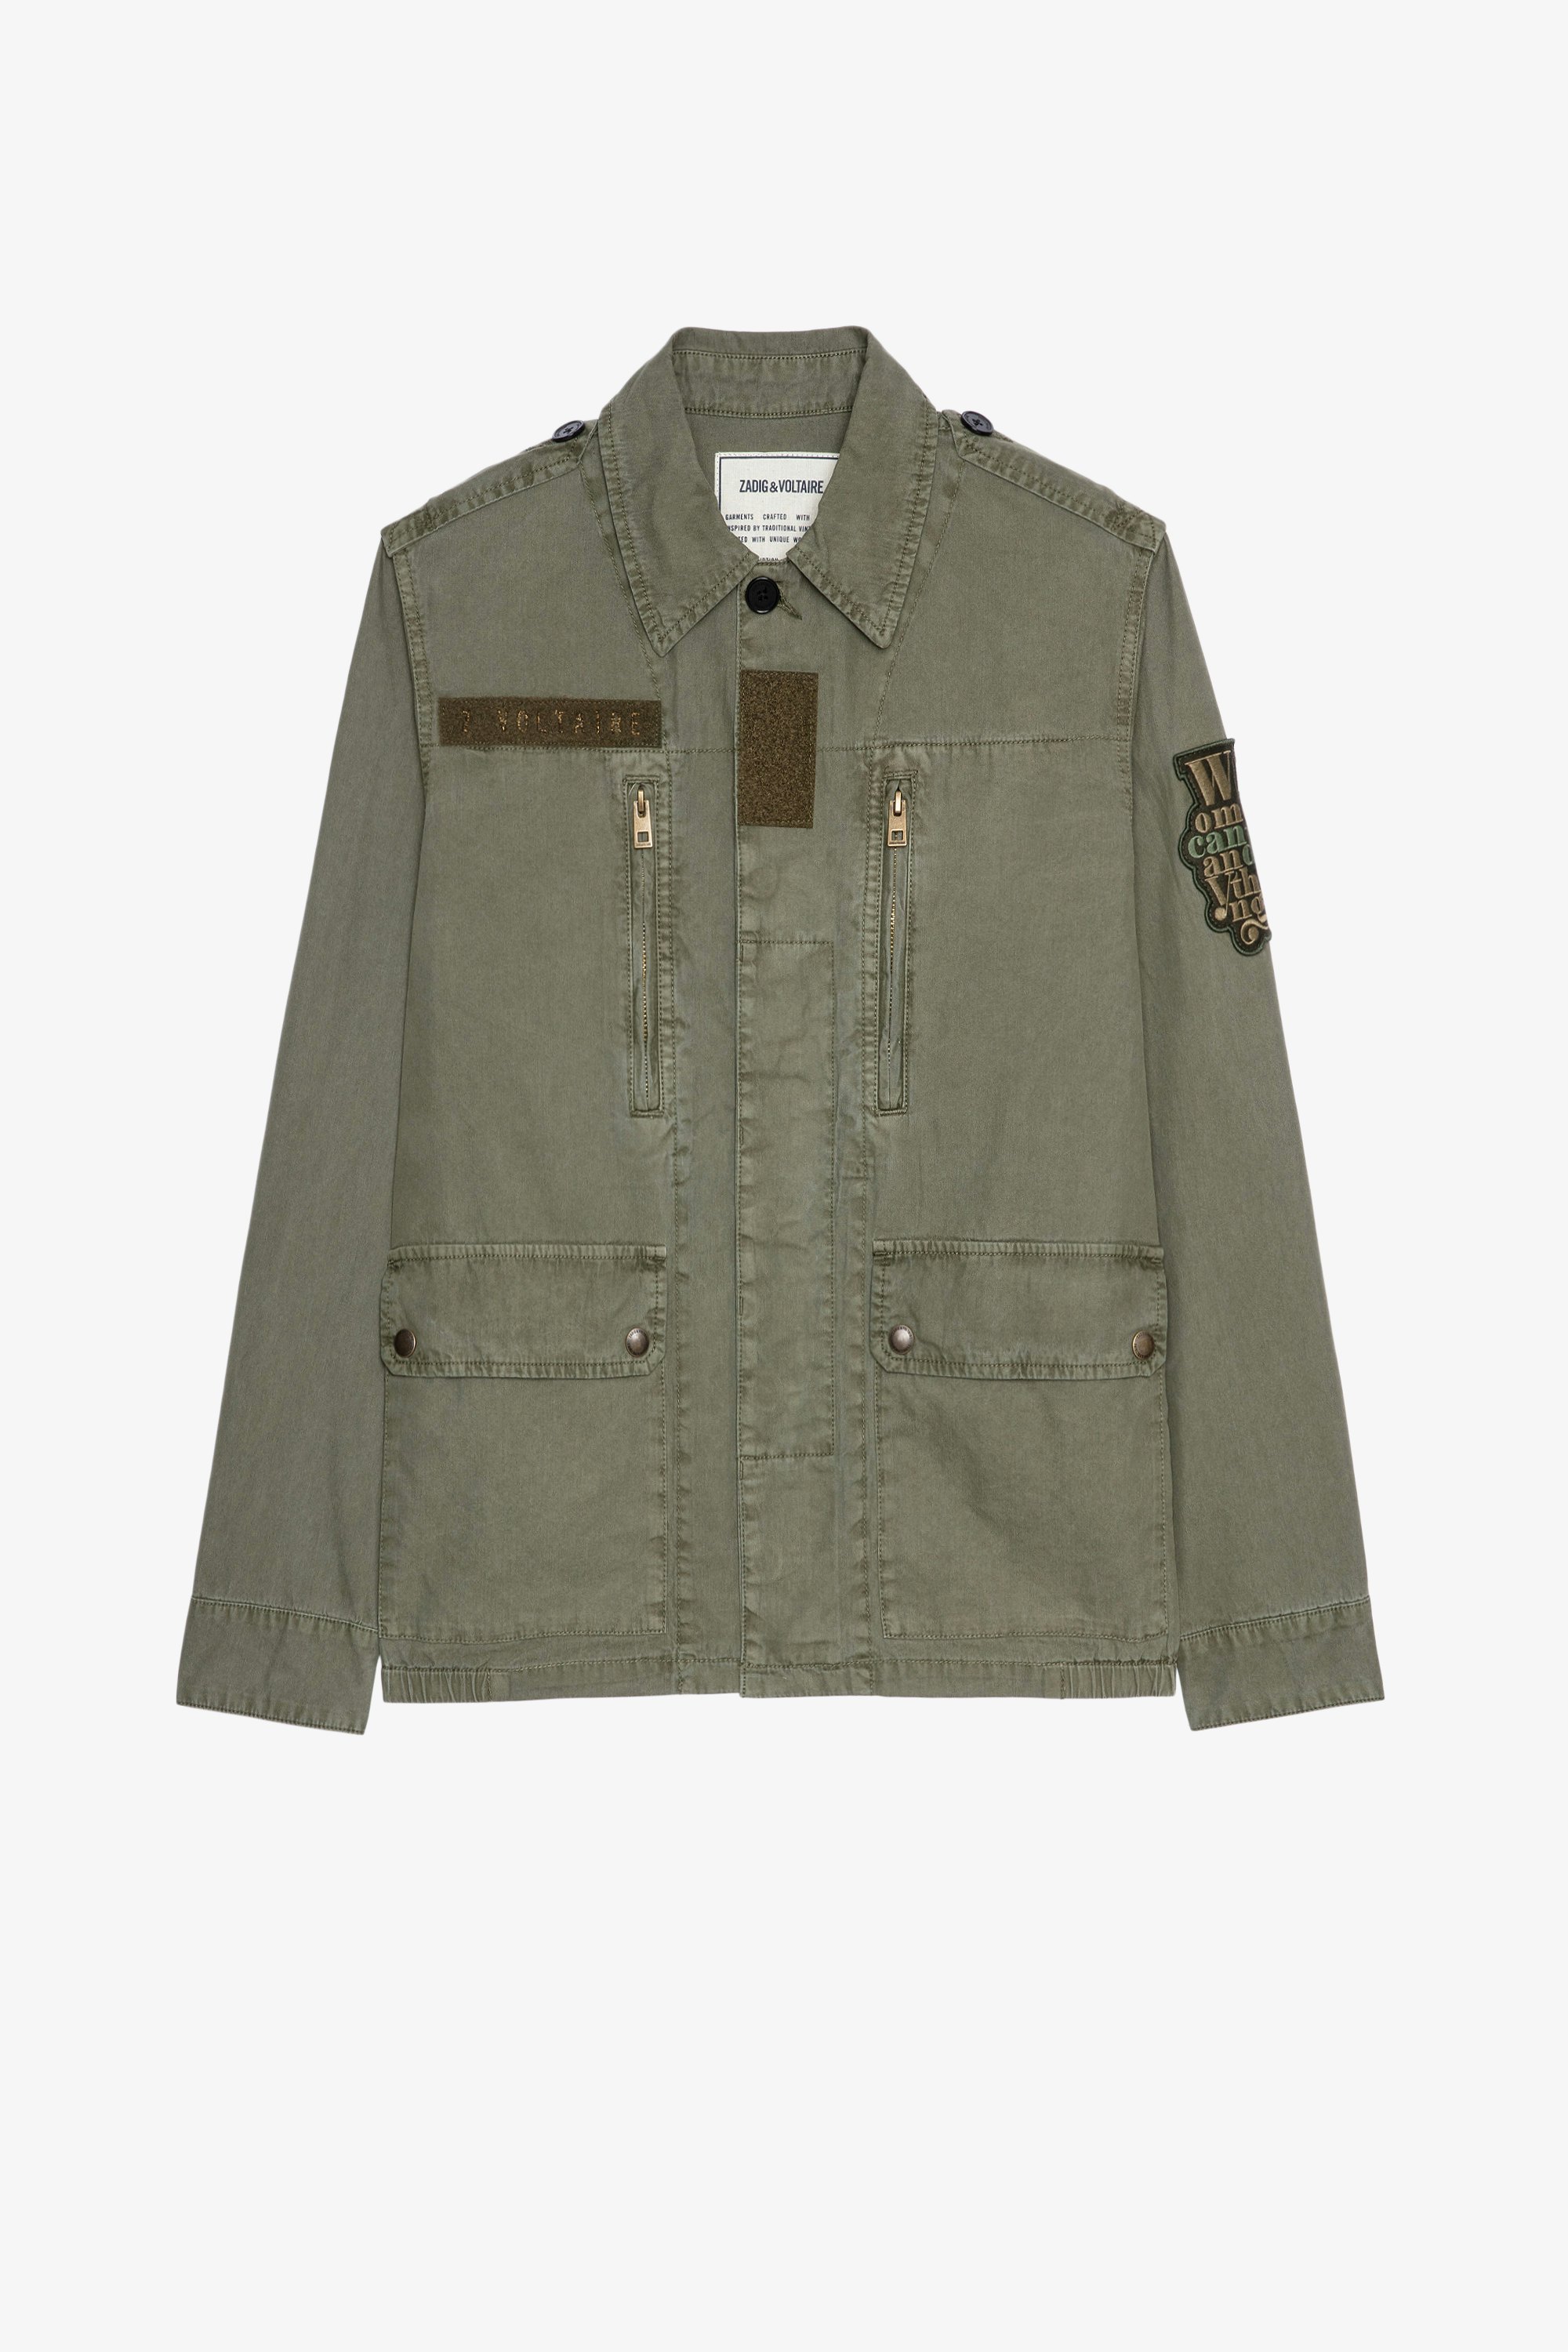 Kid Lave Jacket Women's cotton military jacket in khaki with a patch on the left sleeve